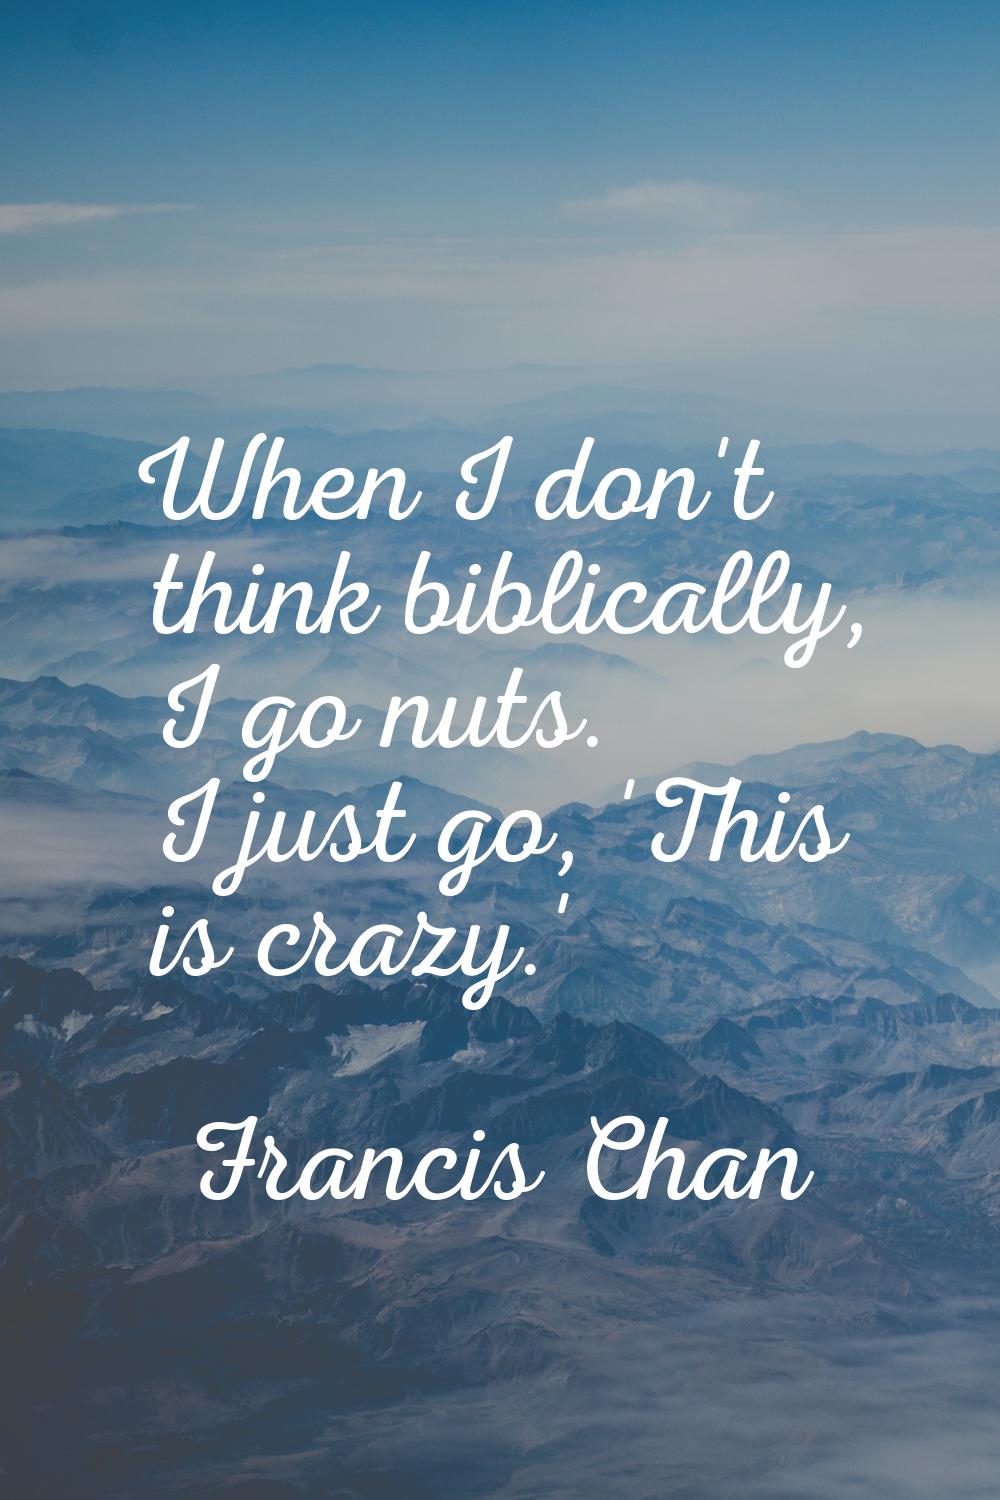 When I don't think biblically, I go nuts. I just go, 'This is crazy.'